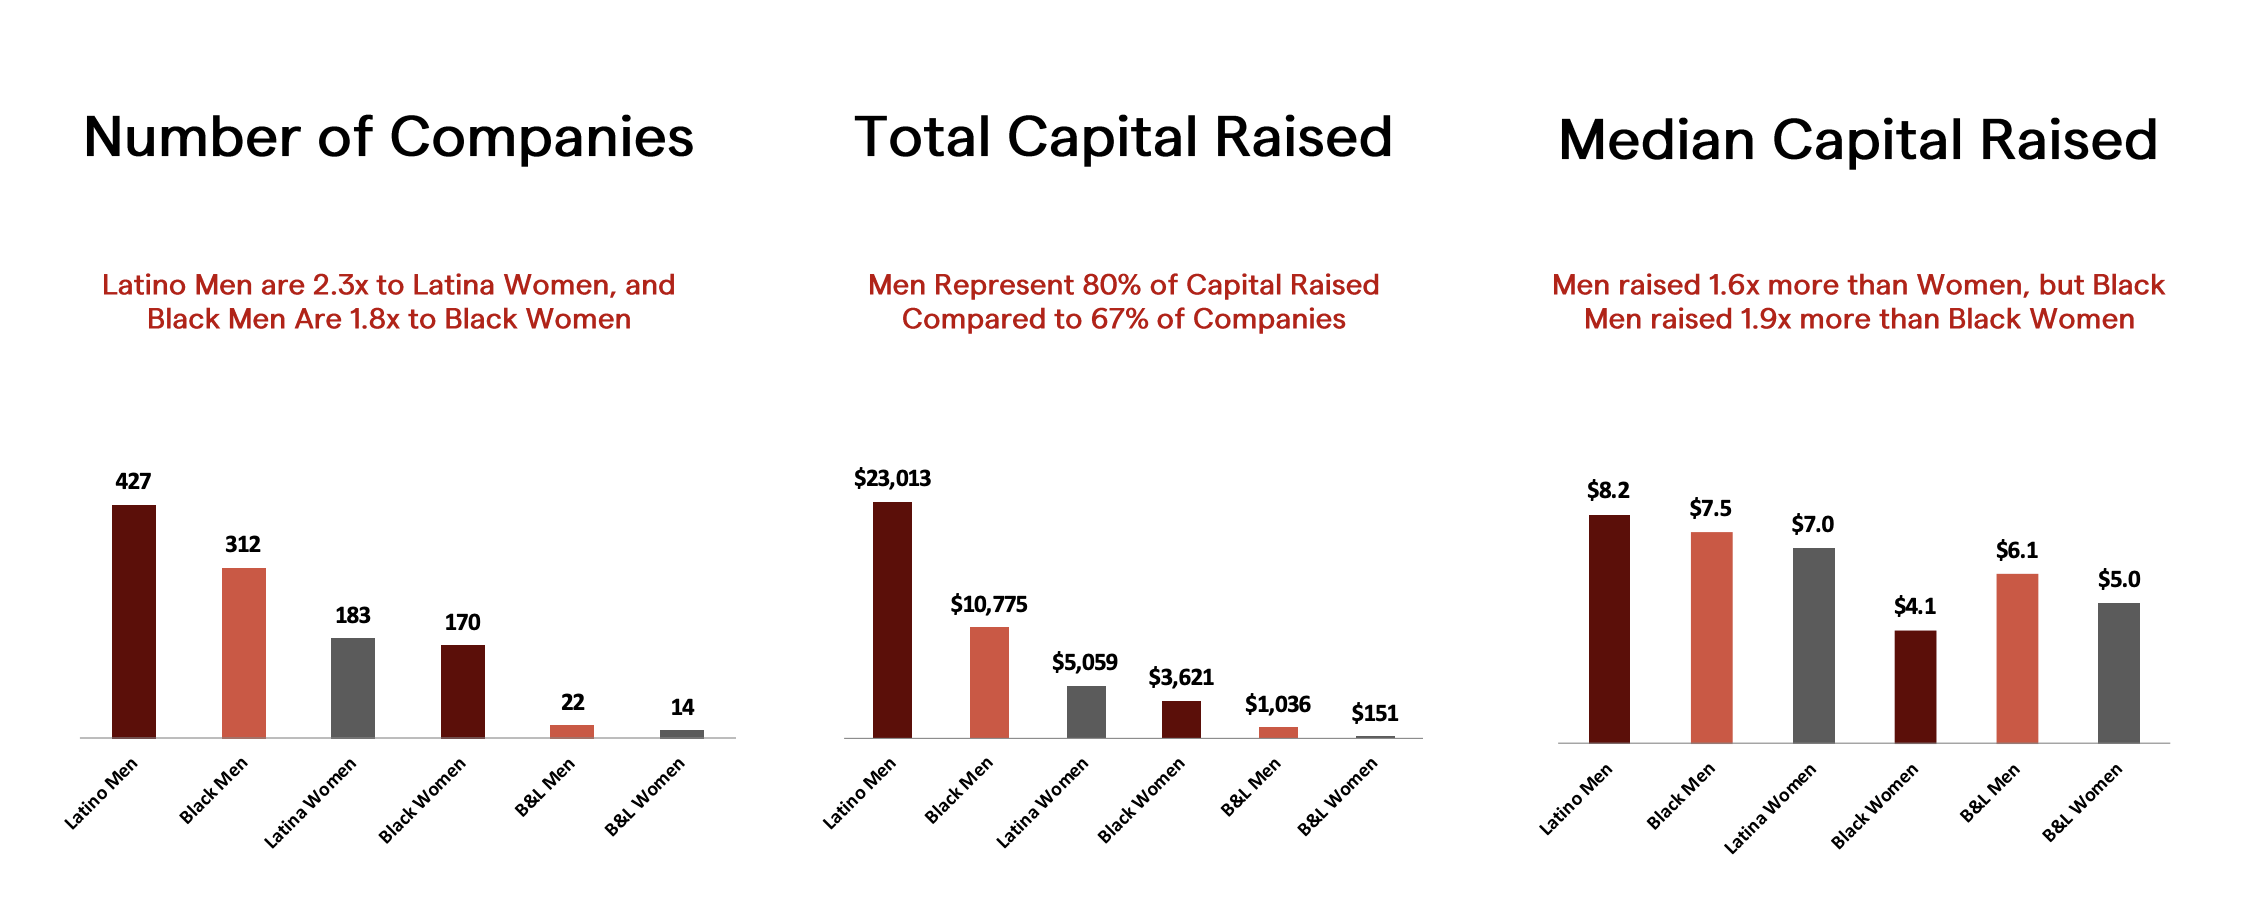 Charts showing the number of companies and capital raised by Black and Latine men and women